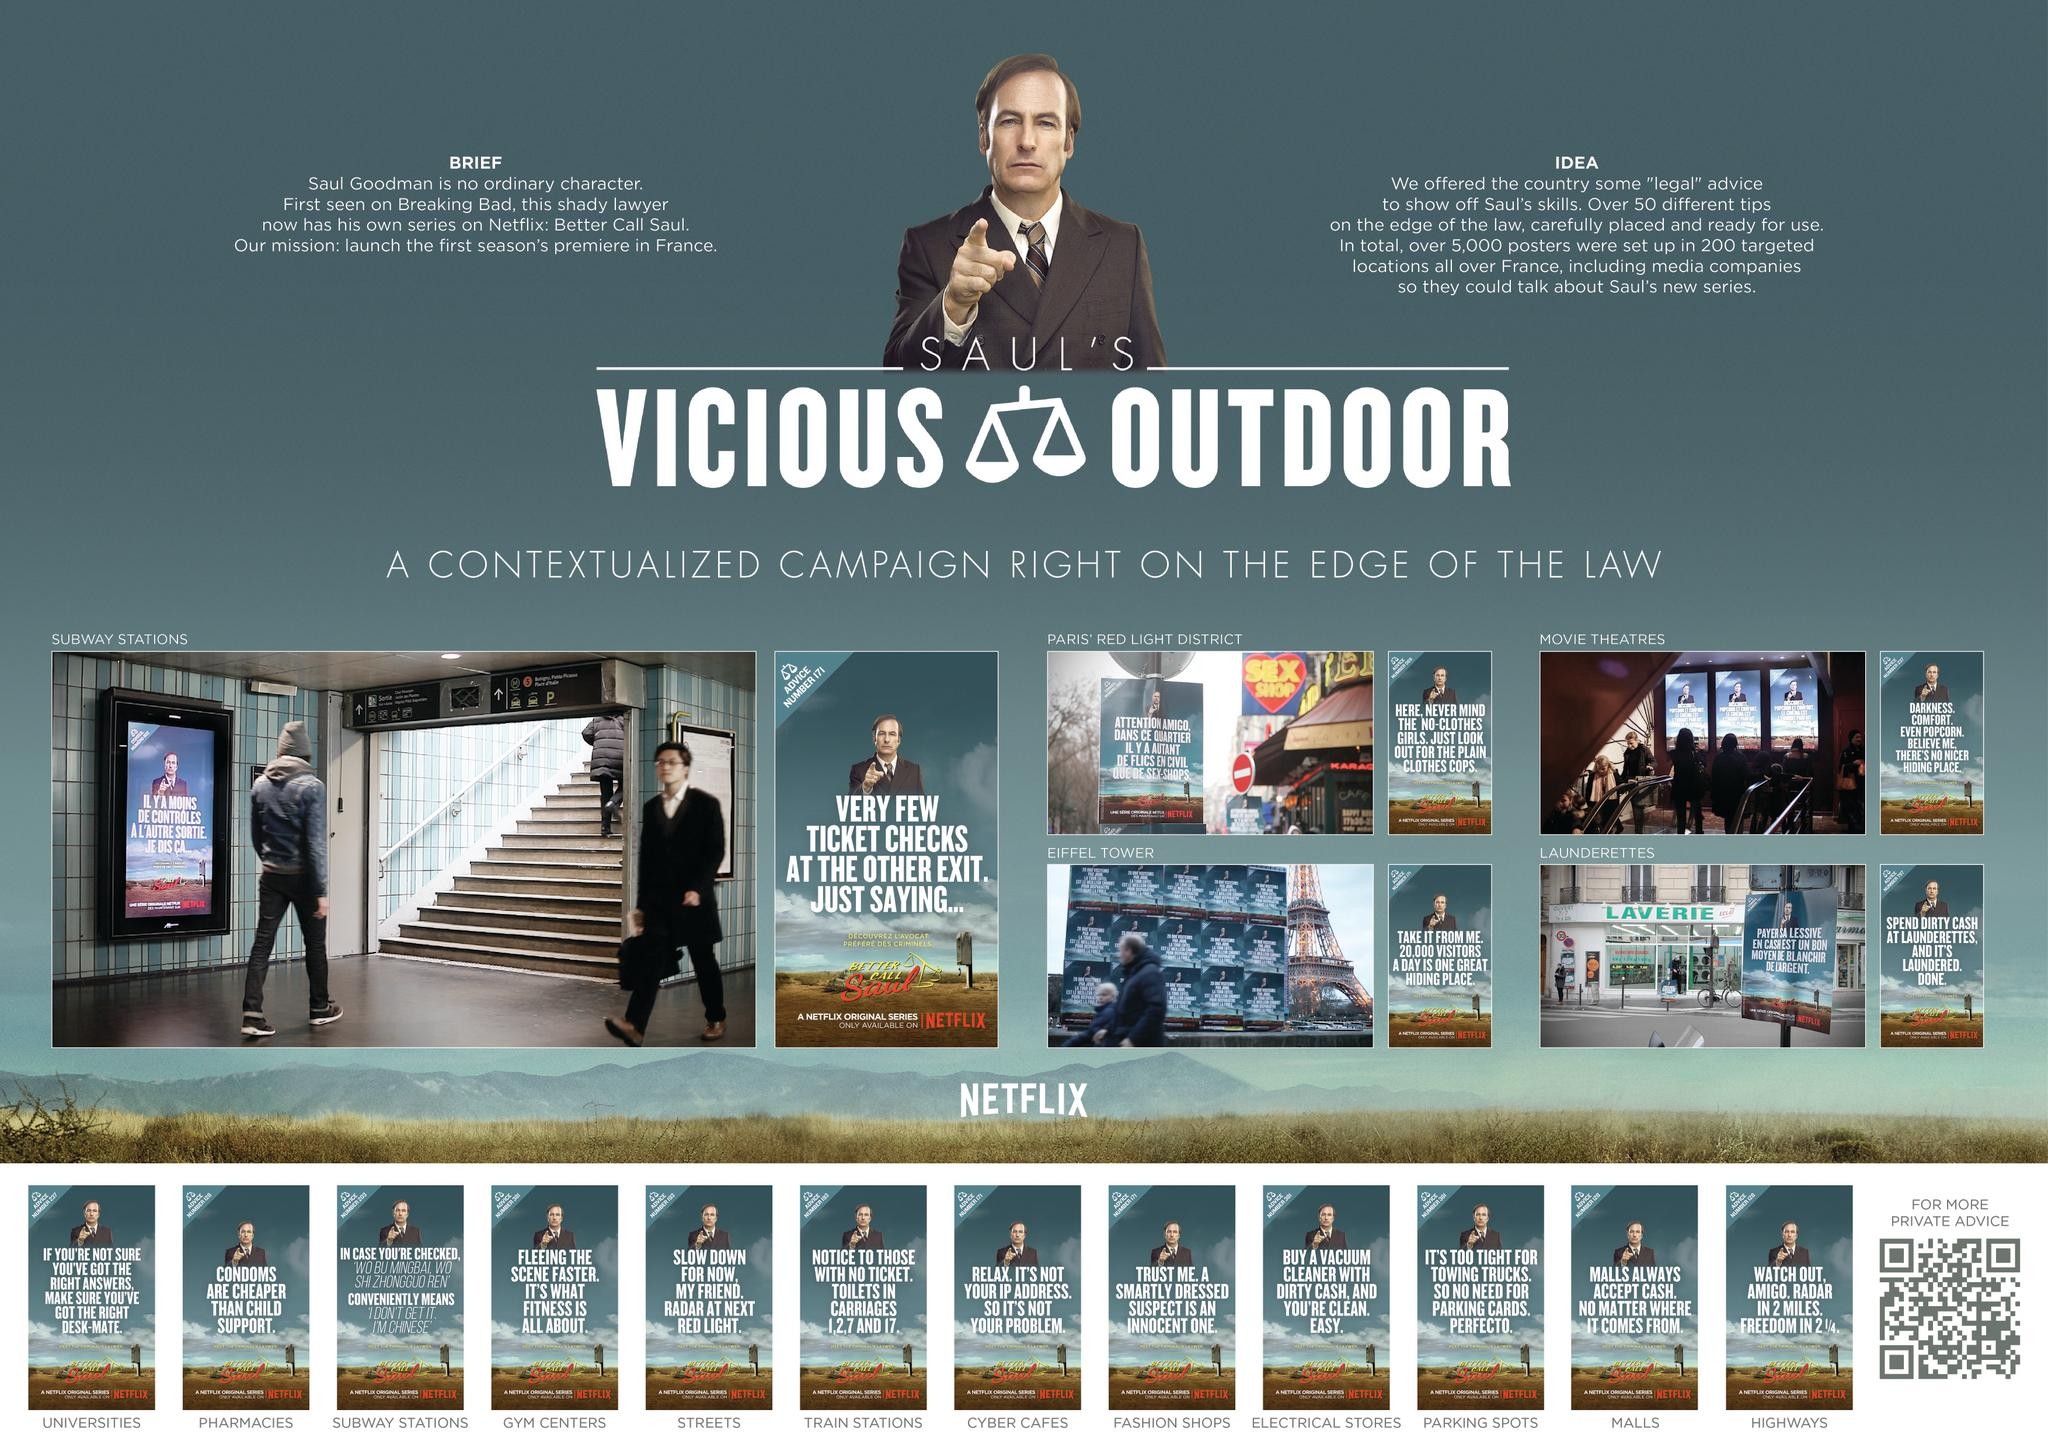 BETTER CALL SAUL - THE VICIOUS CAMPAIGN